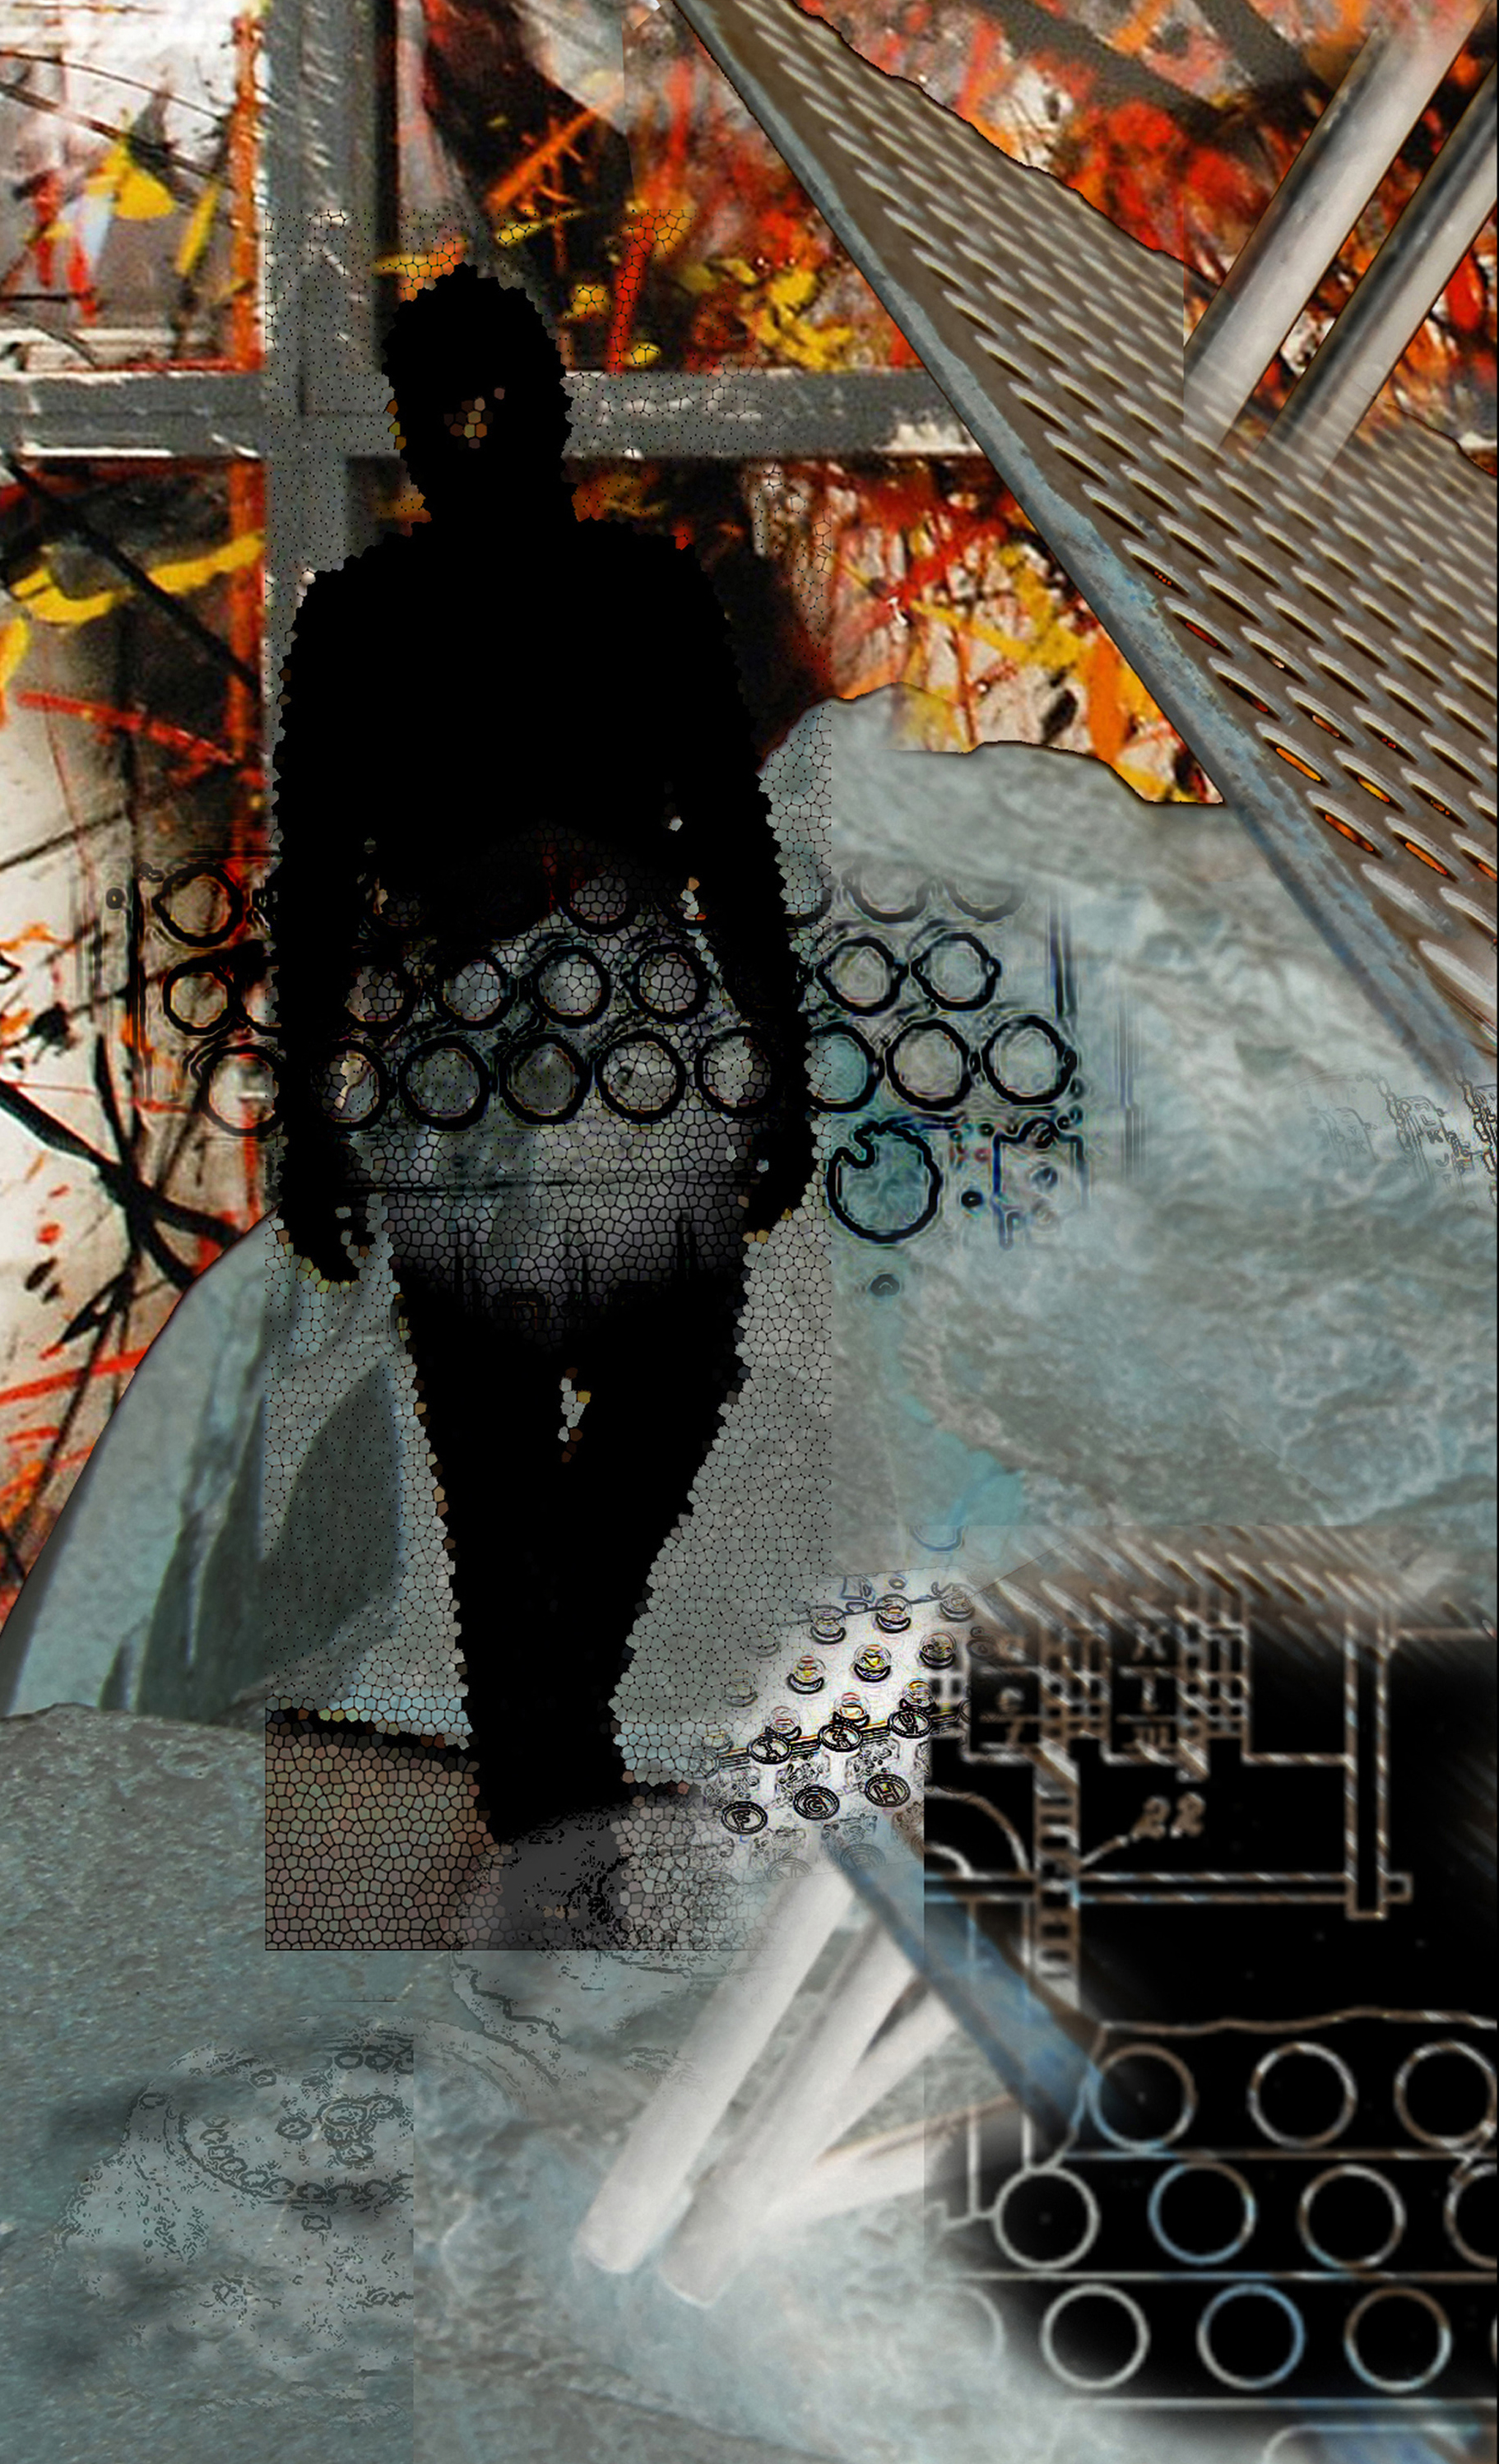 A mixed media artwork showing a silhouetted figure standing in front of a window with fire behind it and metal structures in the foreground.